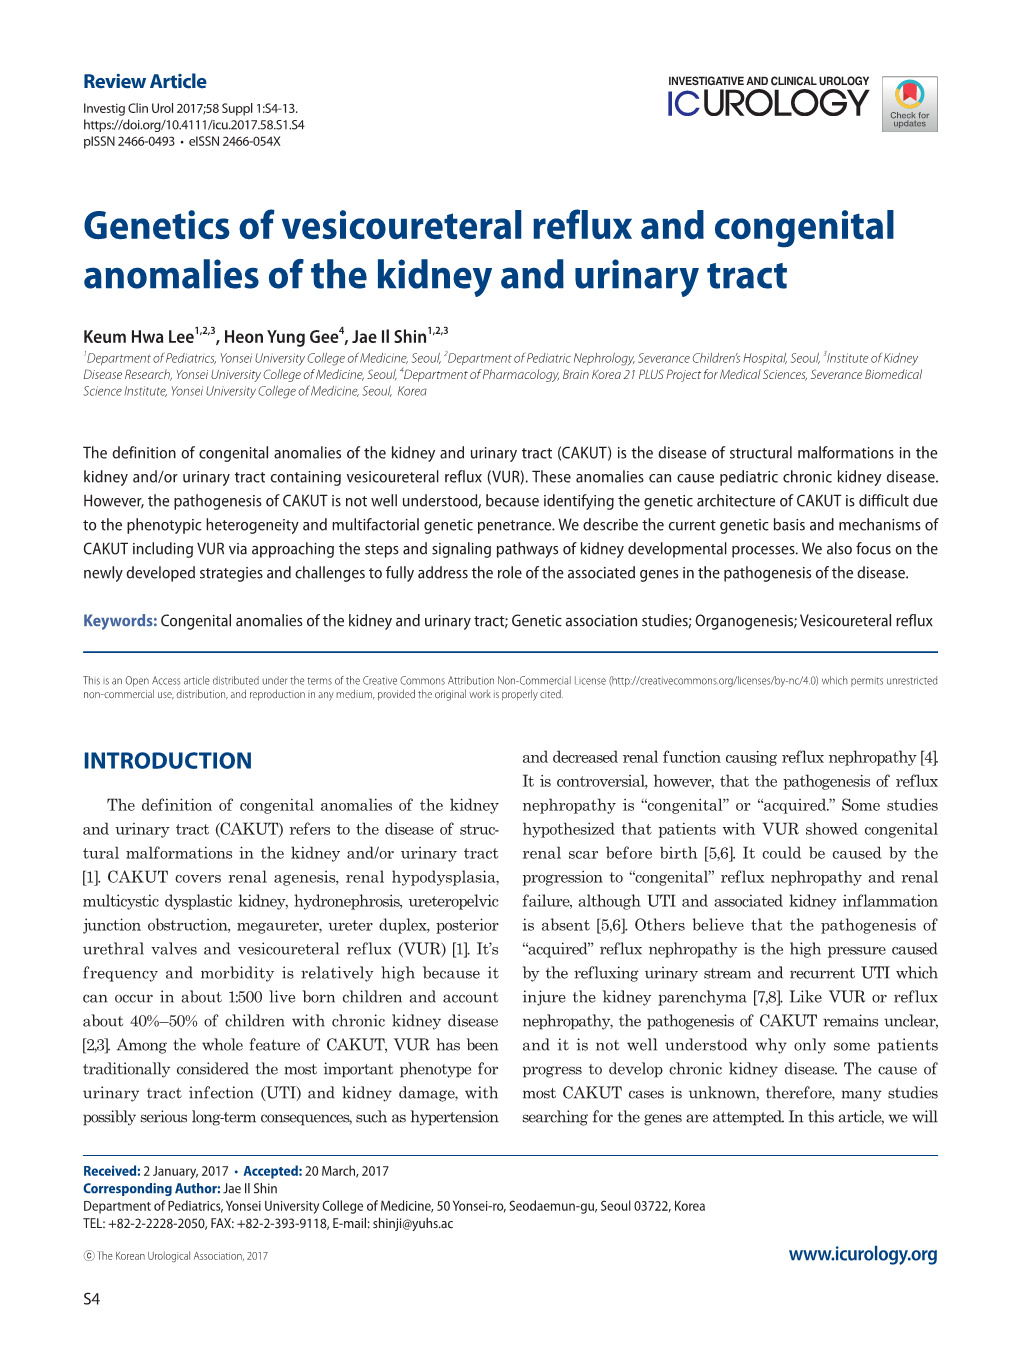 Genetics of Vesicoureteral Reflux and Congenital Anomalies of the Kidney and Urinary Tract